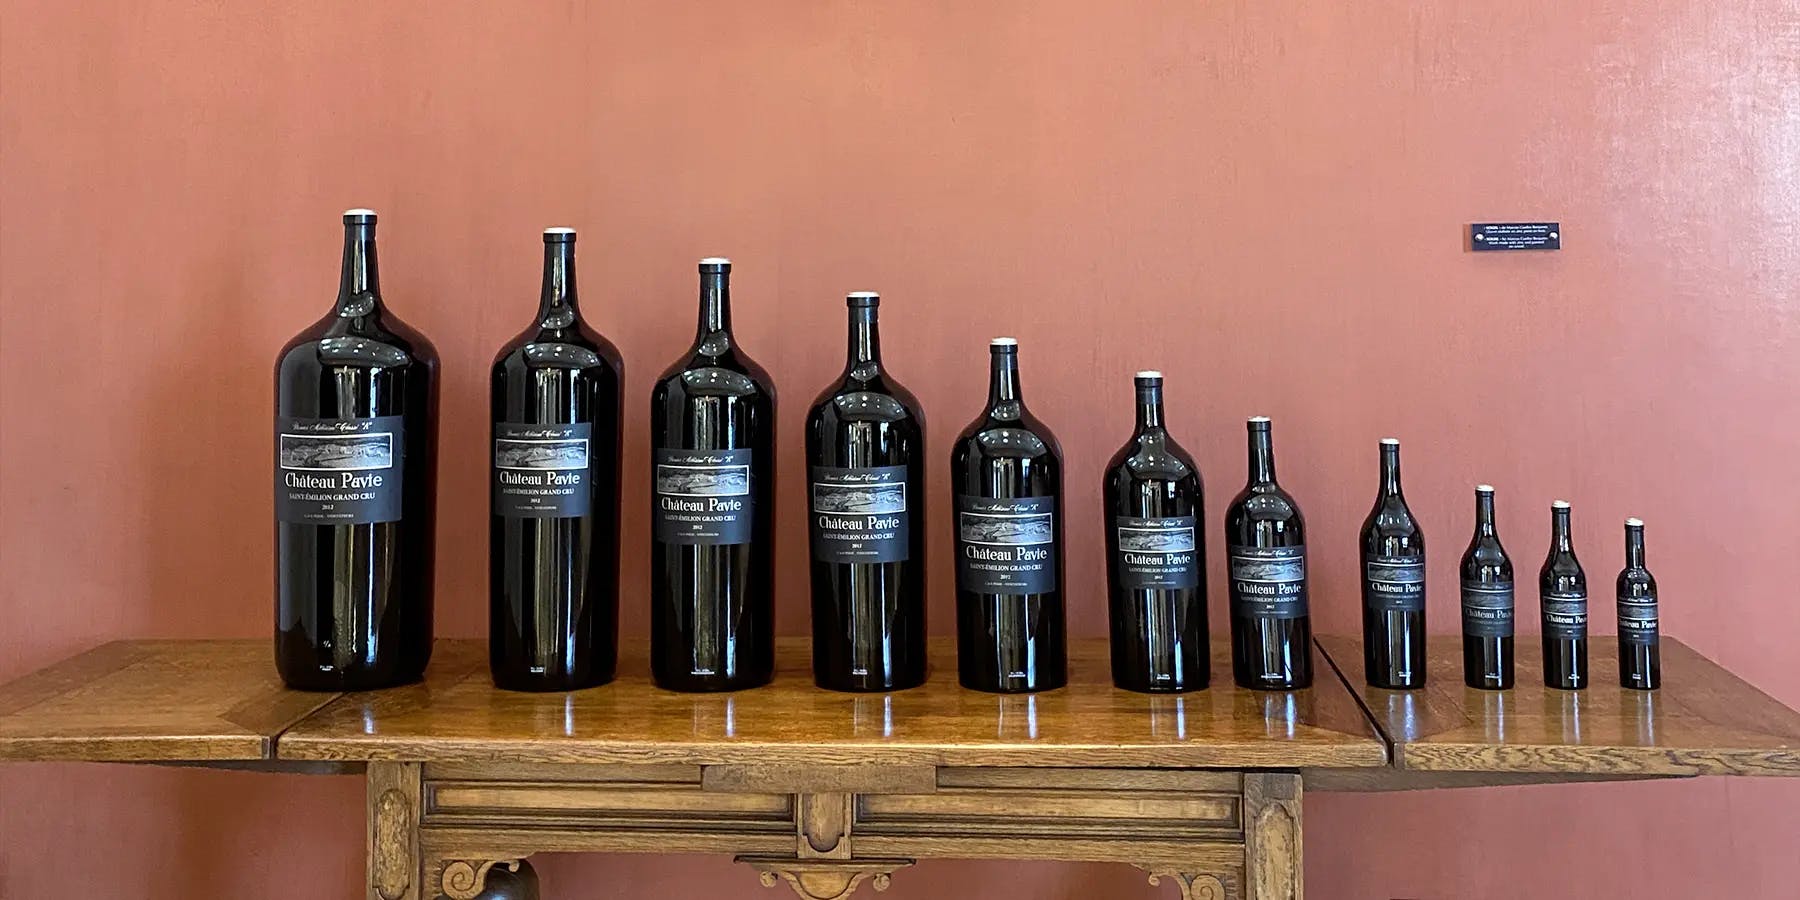 The different sizes of Château Pavie wine bottles